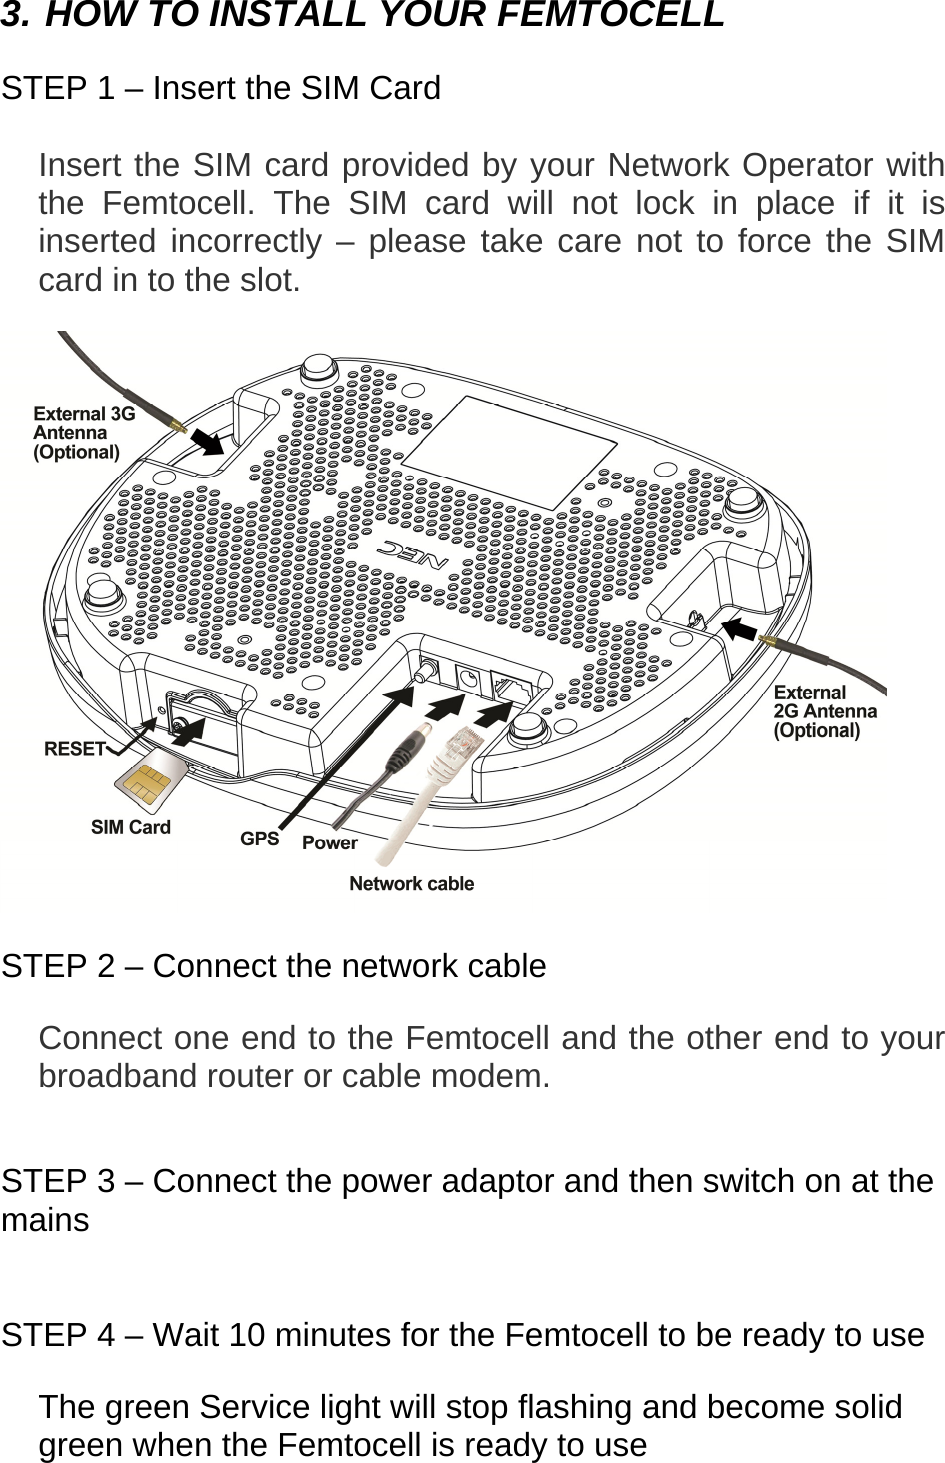  3. HOW TO INSTALL YOUR FEMTOCELL  STEP 1 – Insert the SIM Card  Insert the SIM card provided by your Network Operator with the Femtocell. The SIM card will not lock in place if it is inserted incorrectly – please take care not to force the SIM card in to the slot.                 STEP 2 – Connect the network cable  Connect one end to the Femtocell and the other end to your broadband router or cable modem.   STEP 3 – Connect the power adaptor and then switch on at the mains   STEP 4 – Wait 10 minutes for the Femtocell to be ready to use  The green Service light will stop flashing and become solid green when the Femtocell is ready to use    